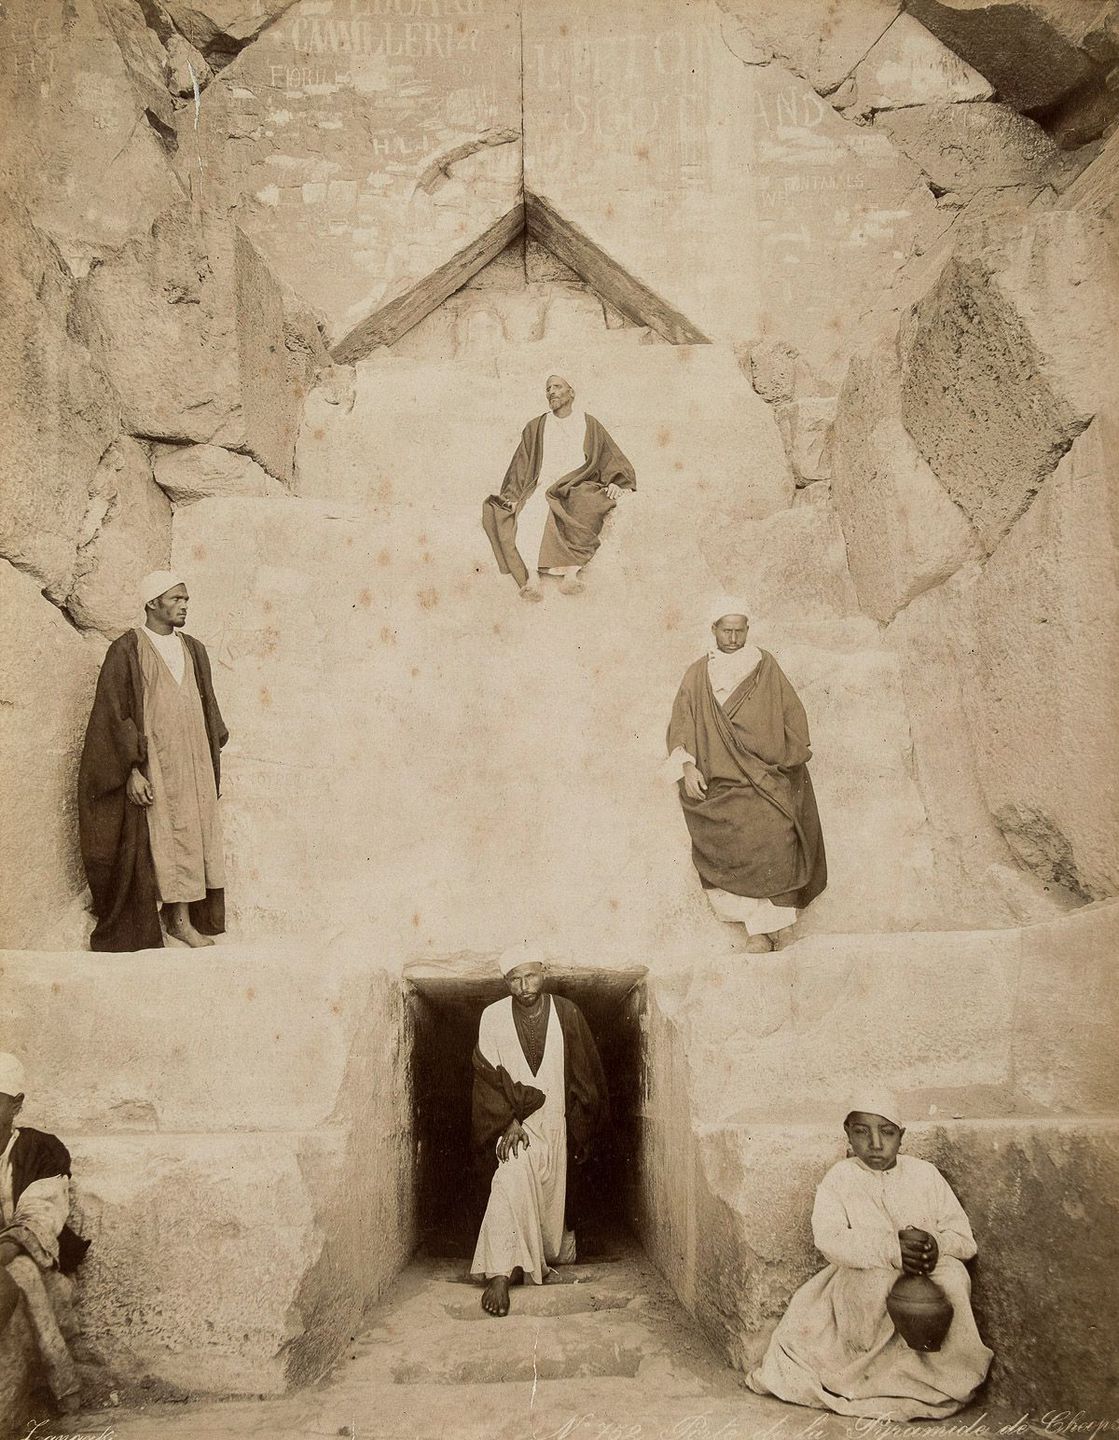 Men at the entrance to the Great Pyramid of Giza.